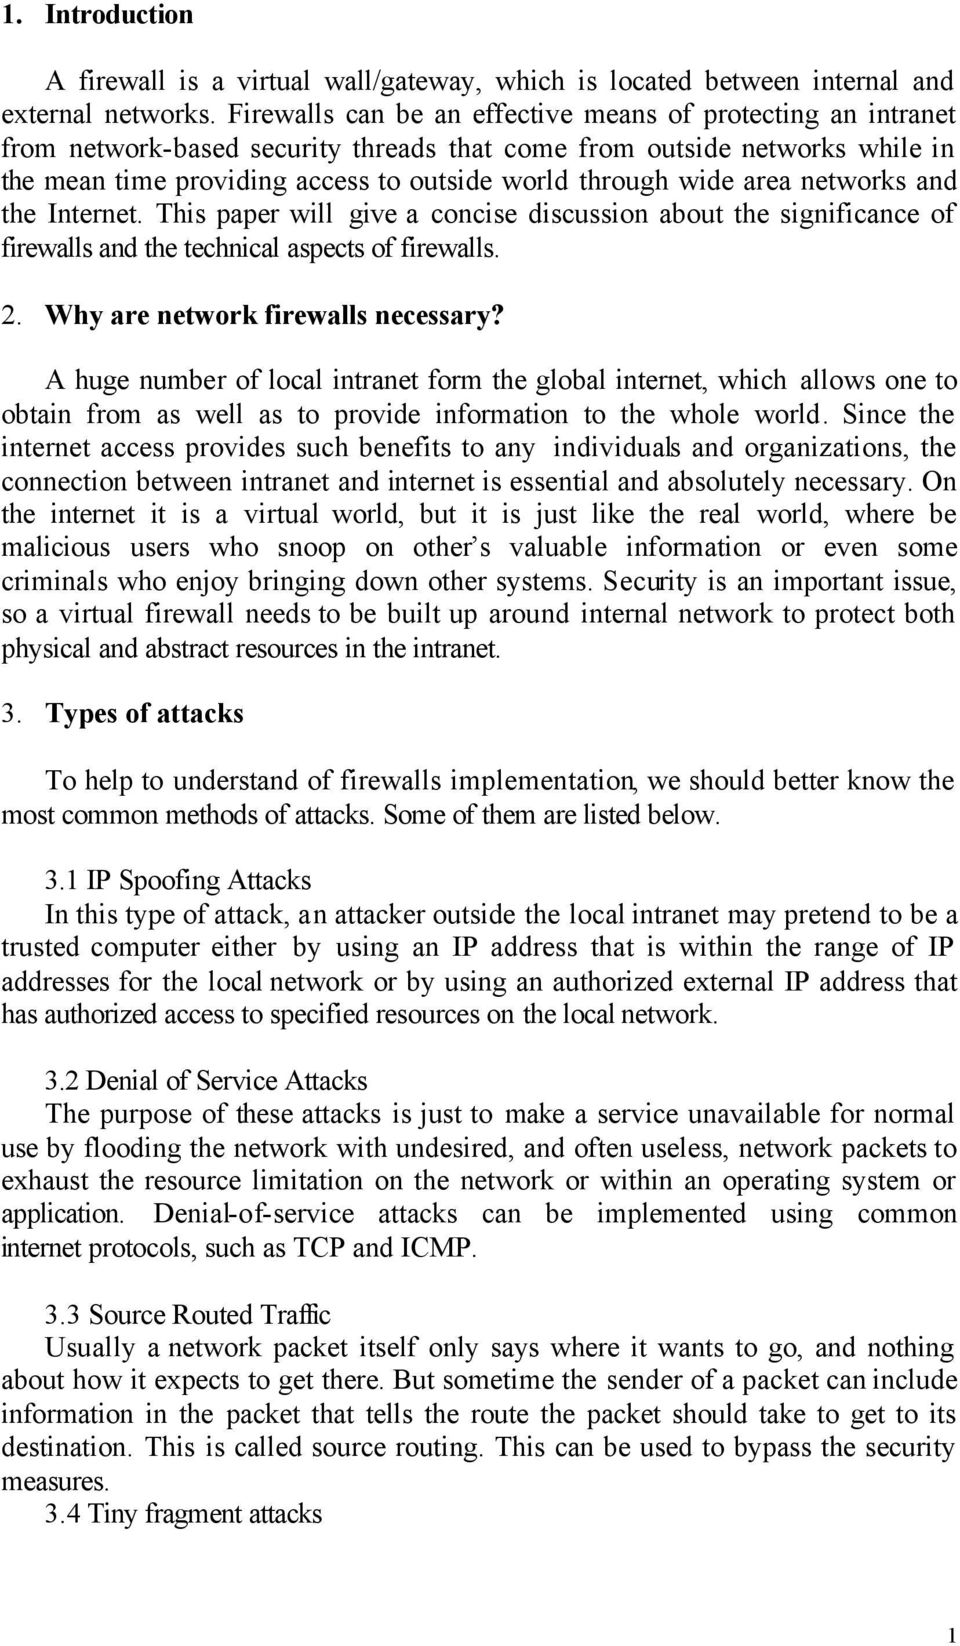 area networks and the Internet. This paper will give a concise discussion about the significance of firewalls and the technical aspects of firewalls. 2. Why are network firewalls necessary?